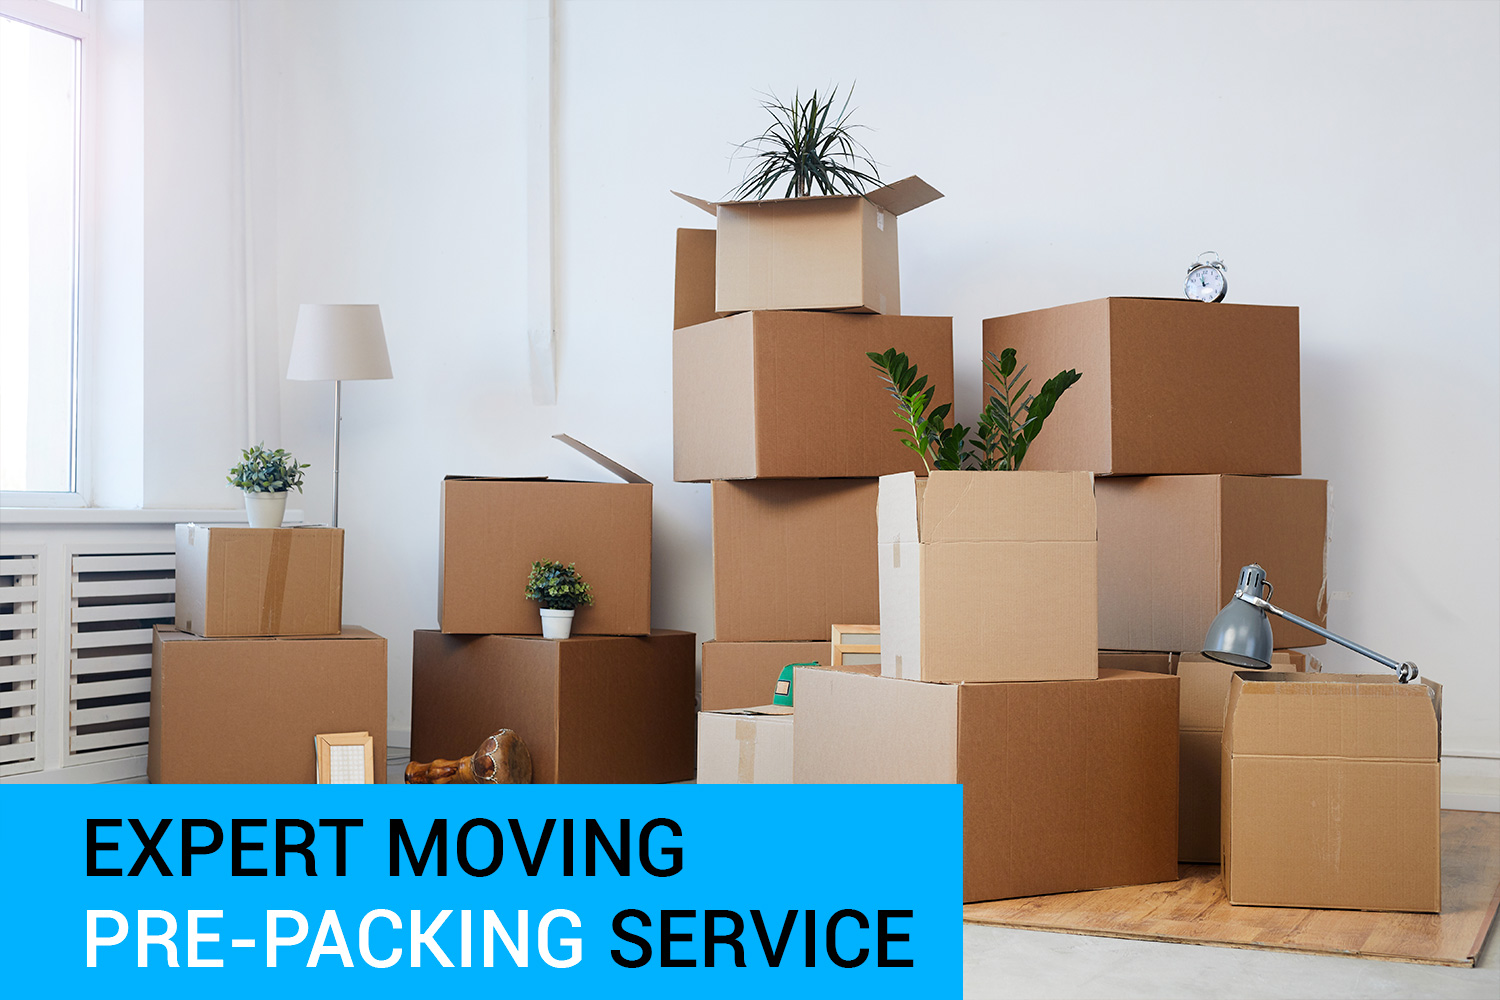 Streamline Your Move with Expert Moving Pre-Packing Service